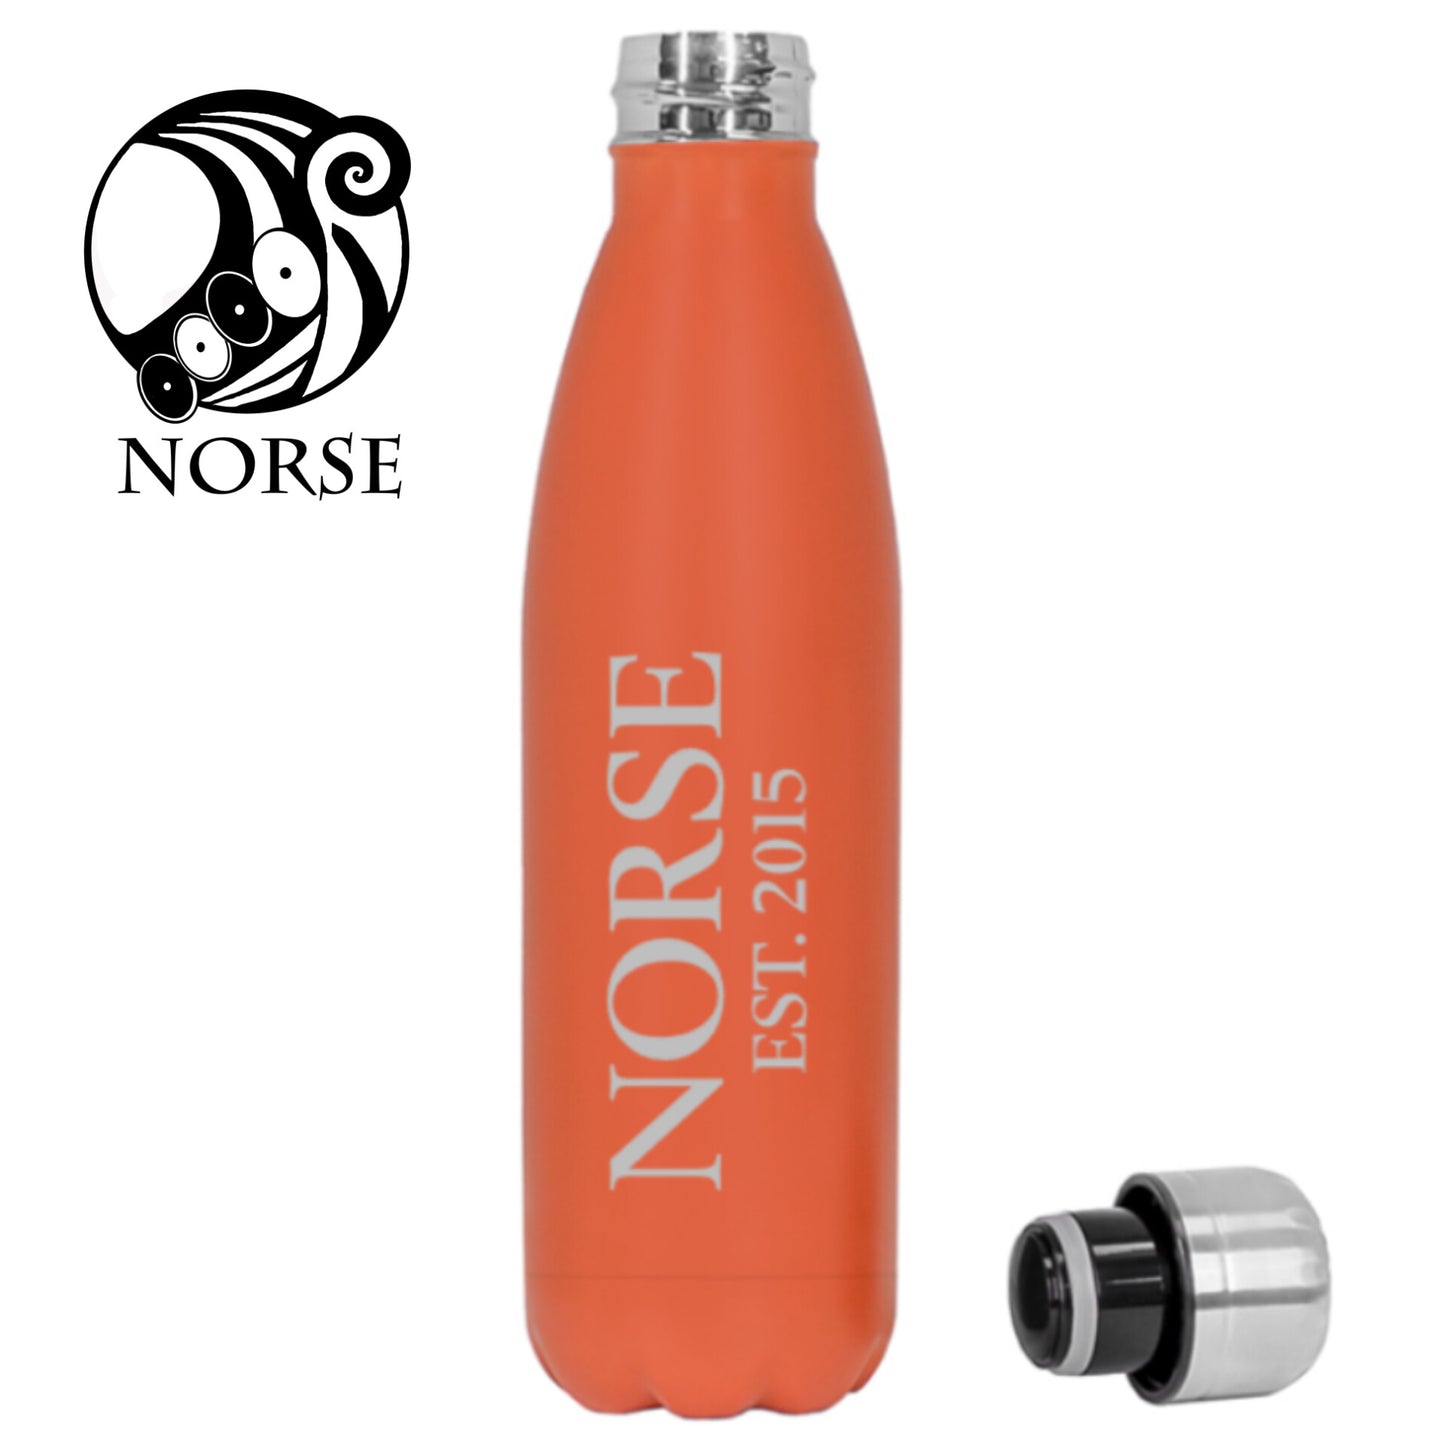 Norse EcoChill Insulated Water Bottle Orange